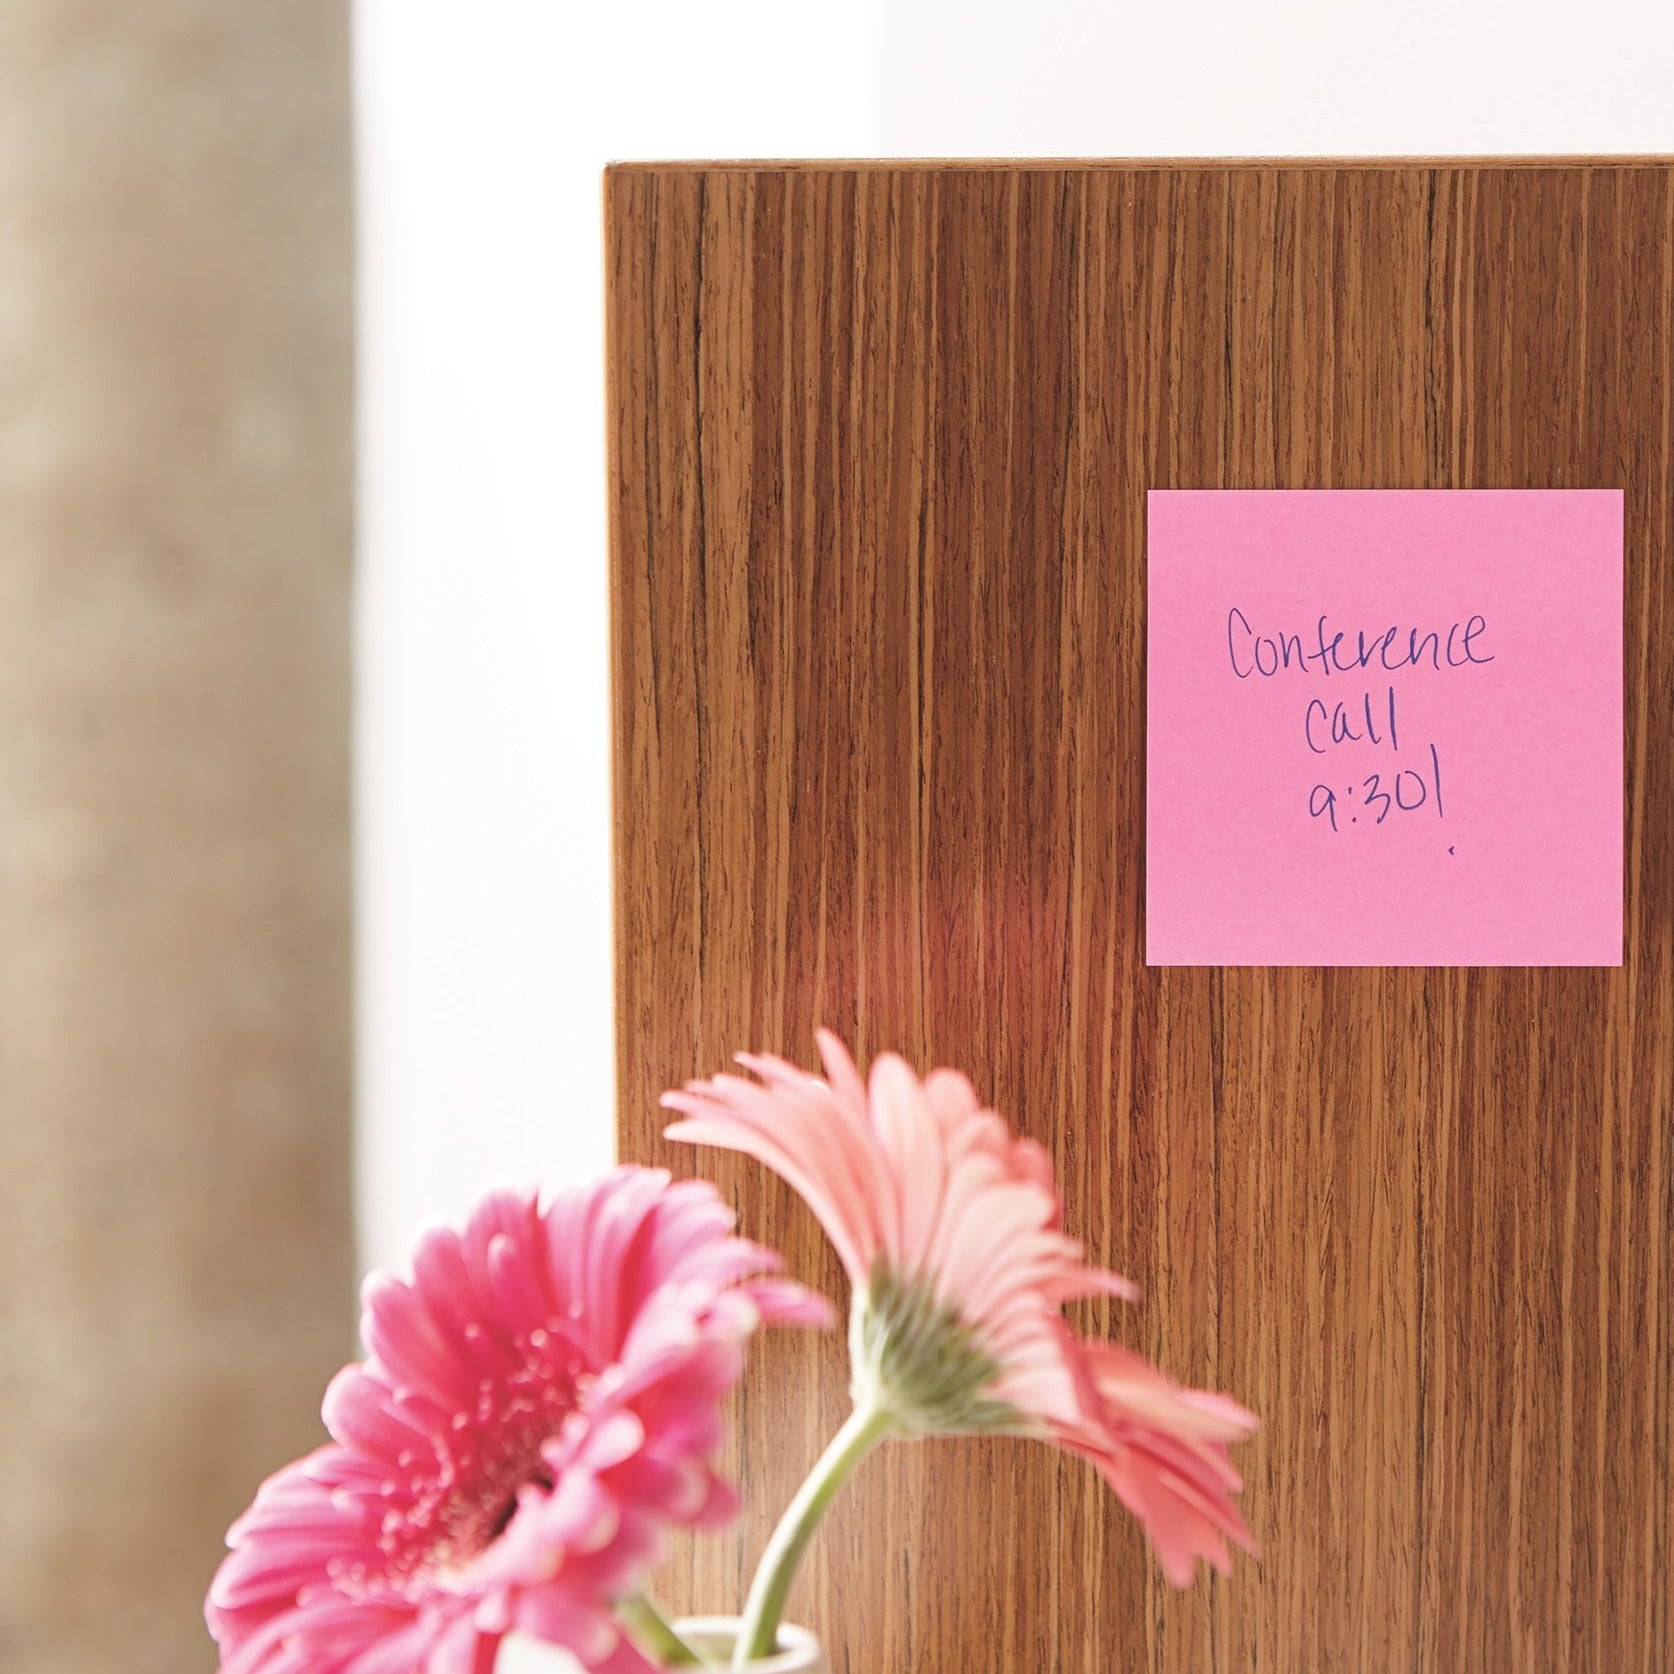 Sticky Notes for UAE